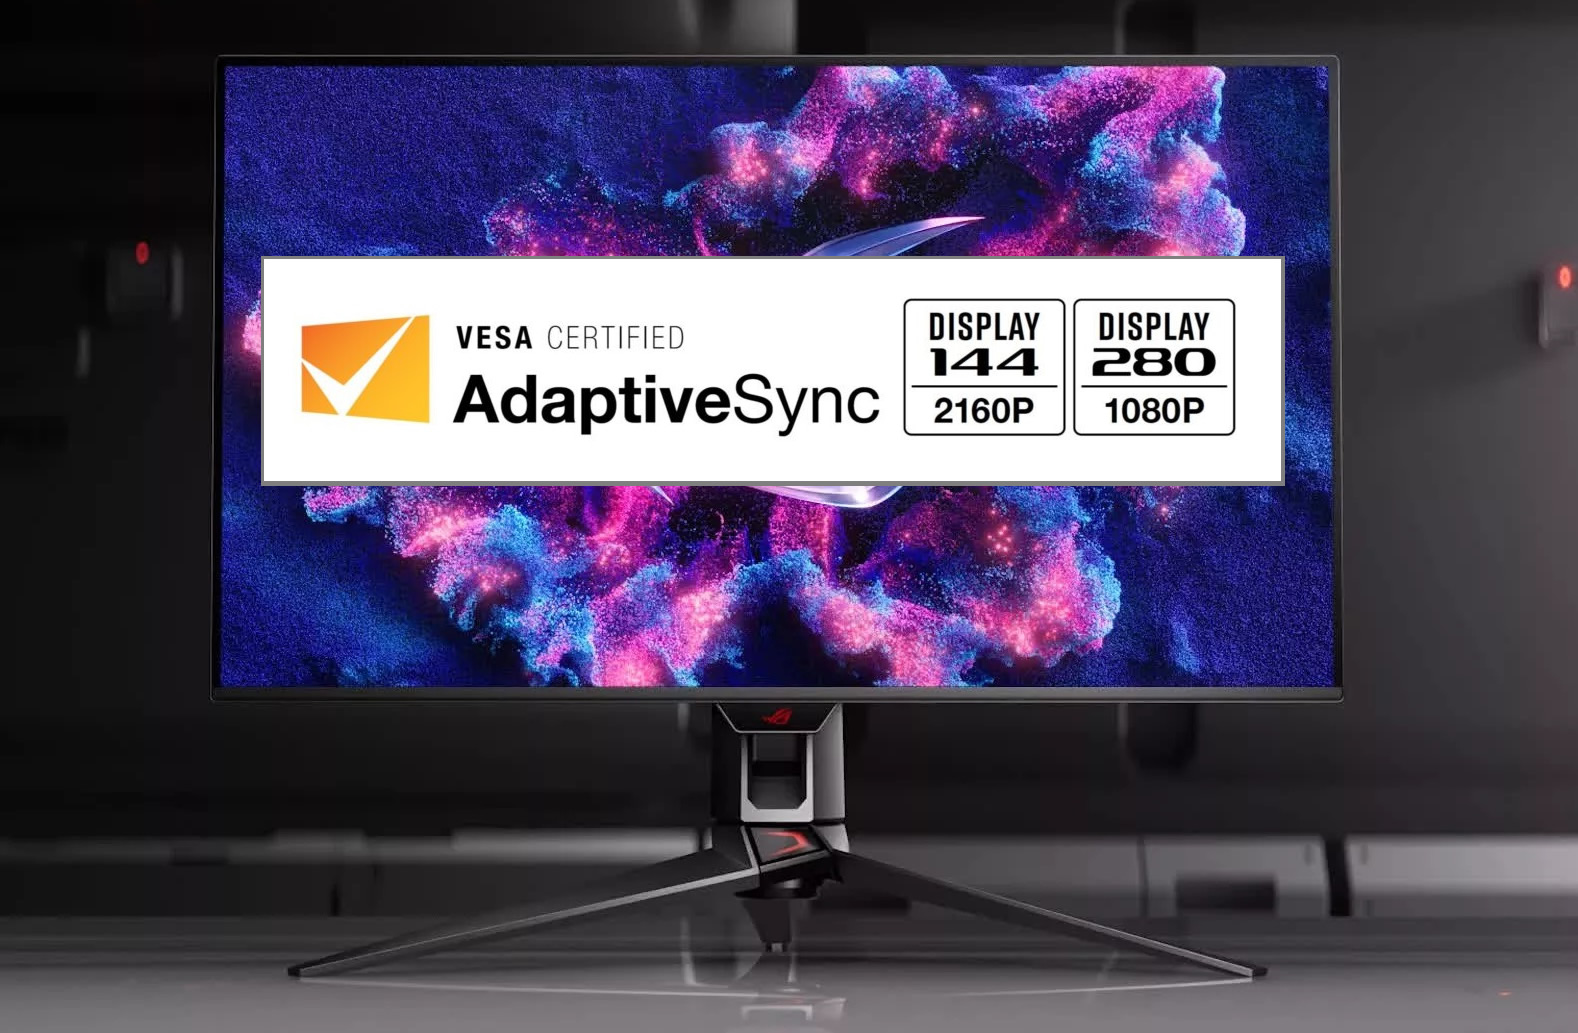 VESA updates their Adaptive-Sync standard to version 1.1a for “Dual-Mode” gaming monitors